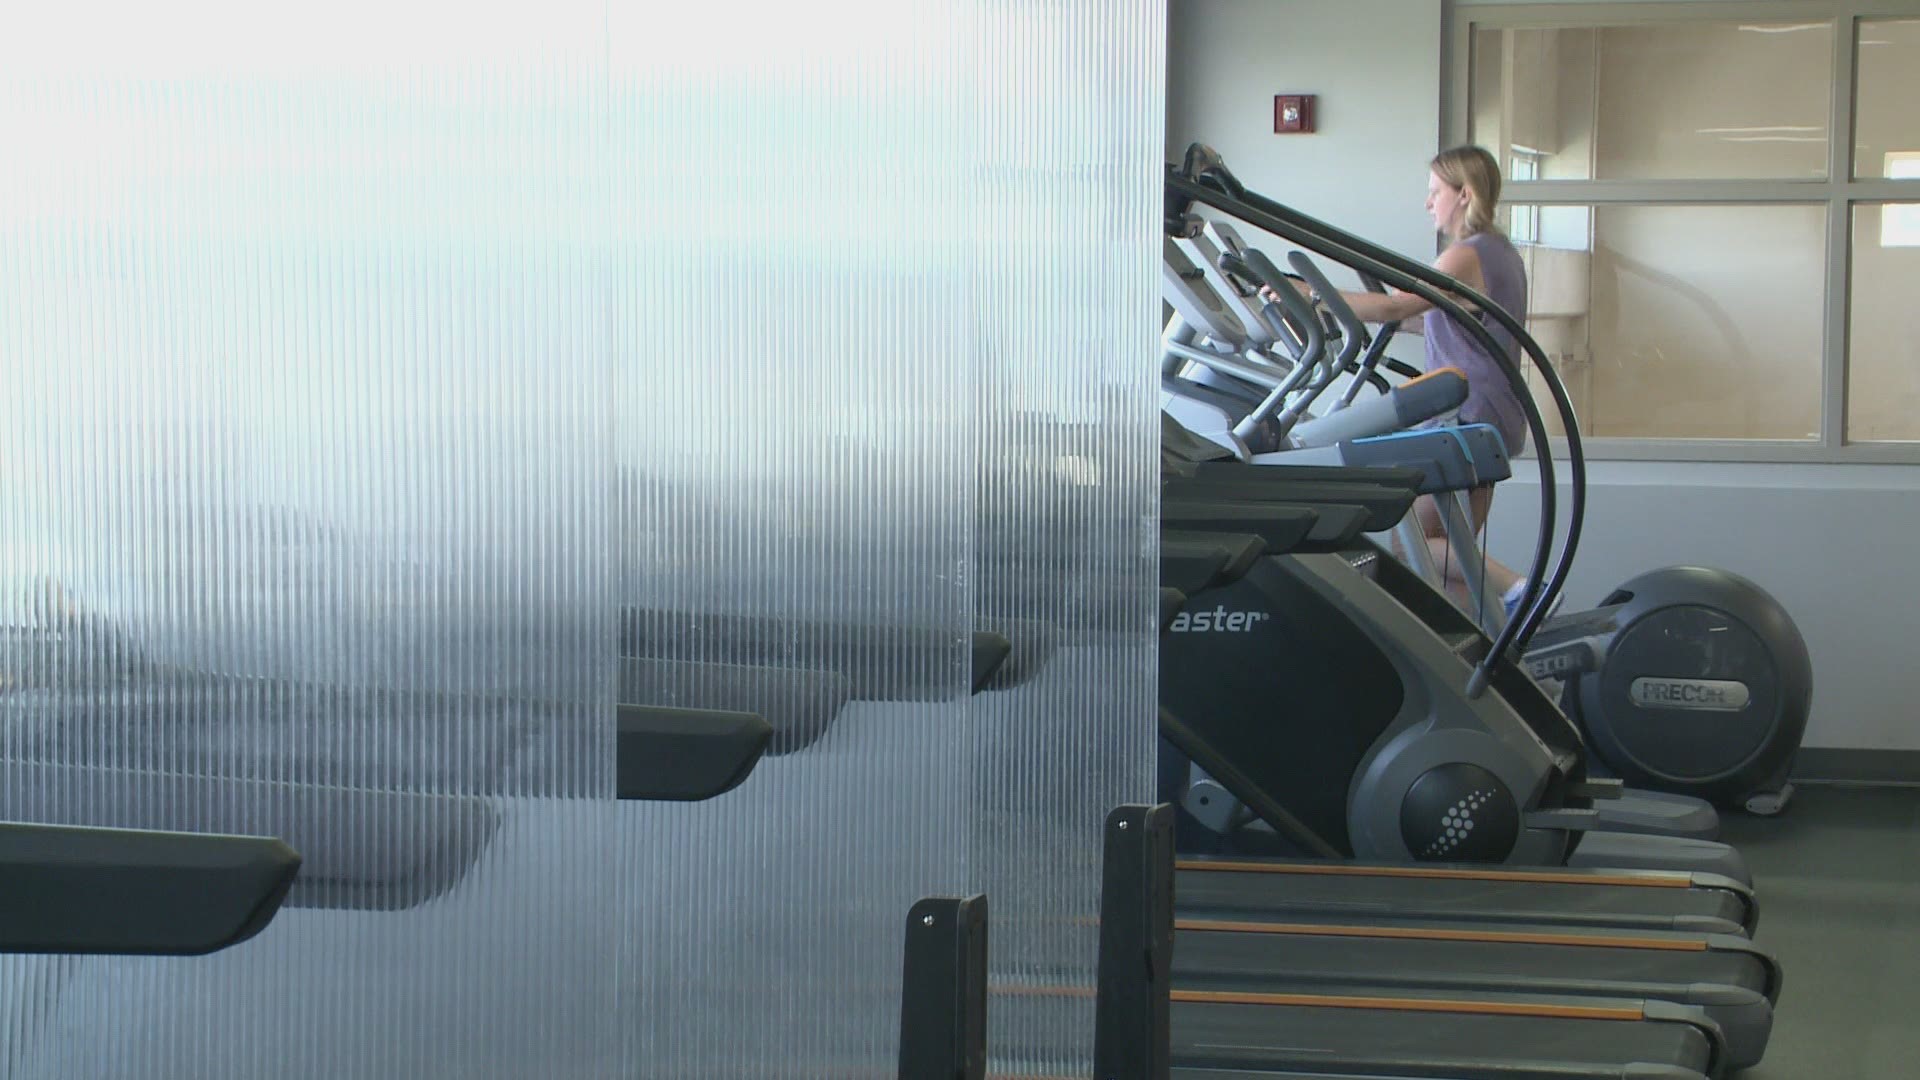 Gyms across East Tennessee are starting to see a surge of people as businesses return to normal.